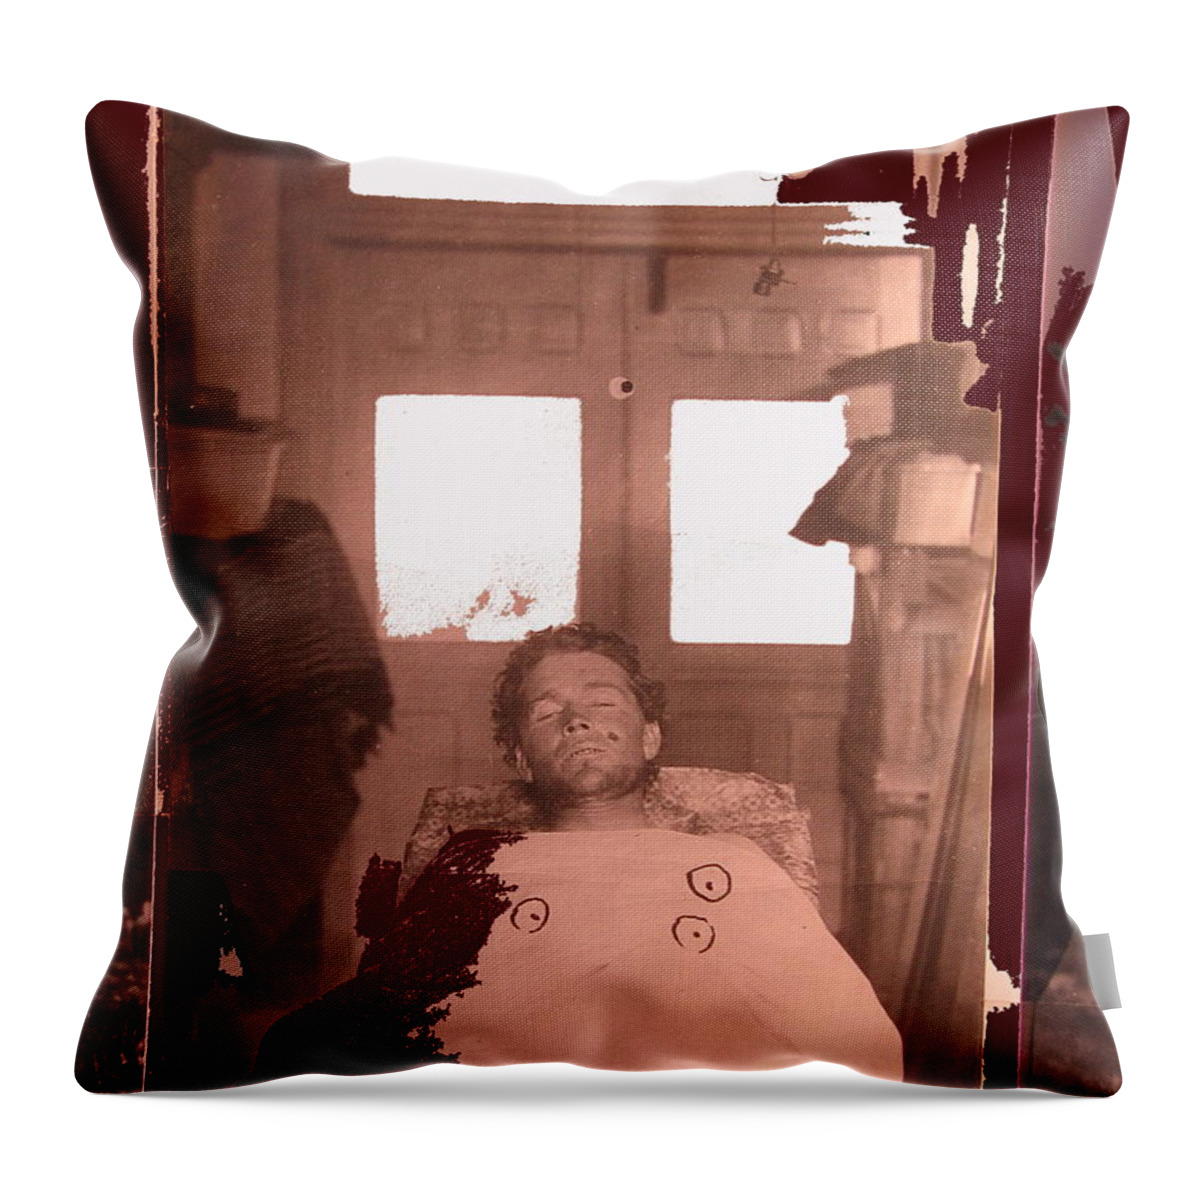 Corpse Bullet Holes Train Robber Cole Estes Aka Cole Young 1872-1896 Collage 1896-2012 Throw Pillow featuring the photograph Corpse Bullet Holes Train Robber Cole Estes Aka Cole Young 1872-1896 Collage 1896-2012 #2 by David Lee Guss